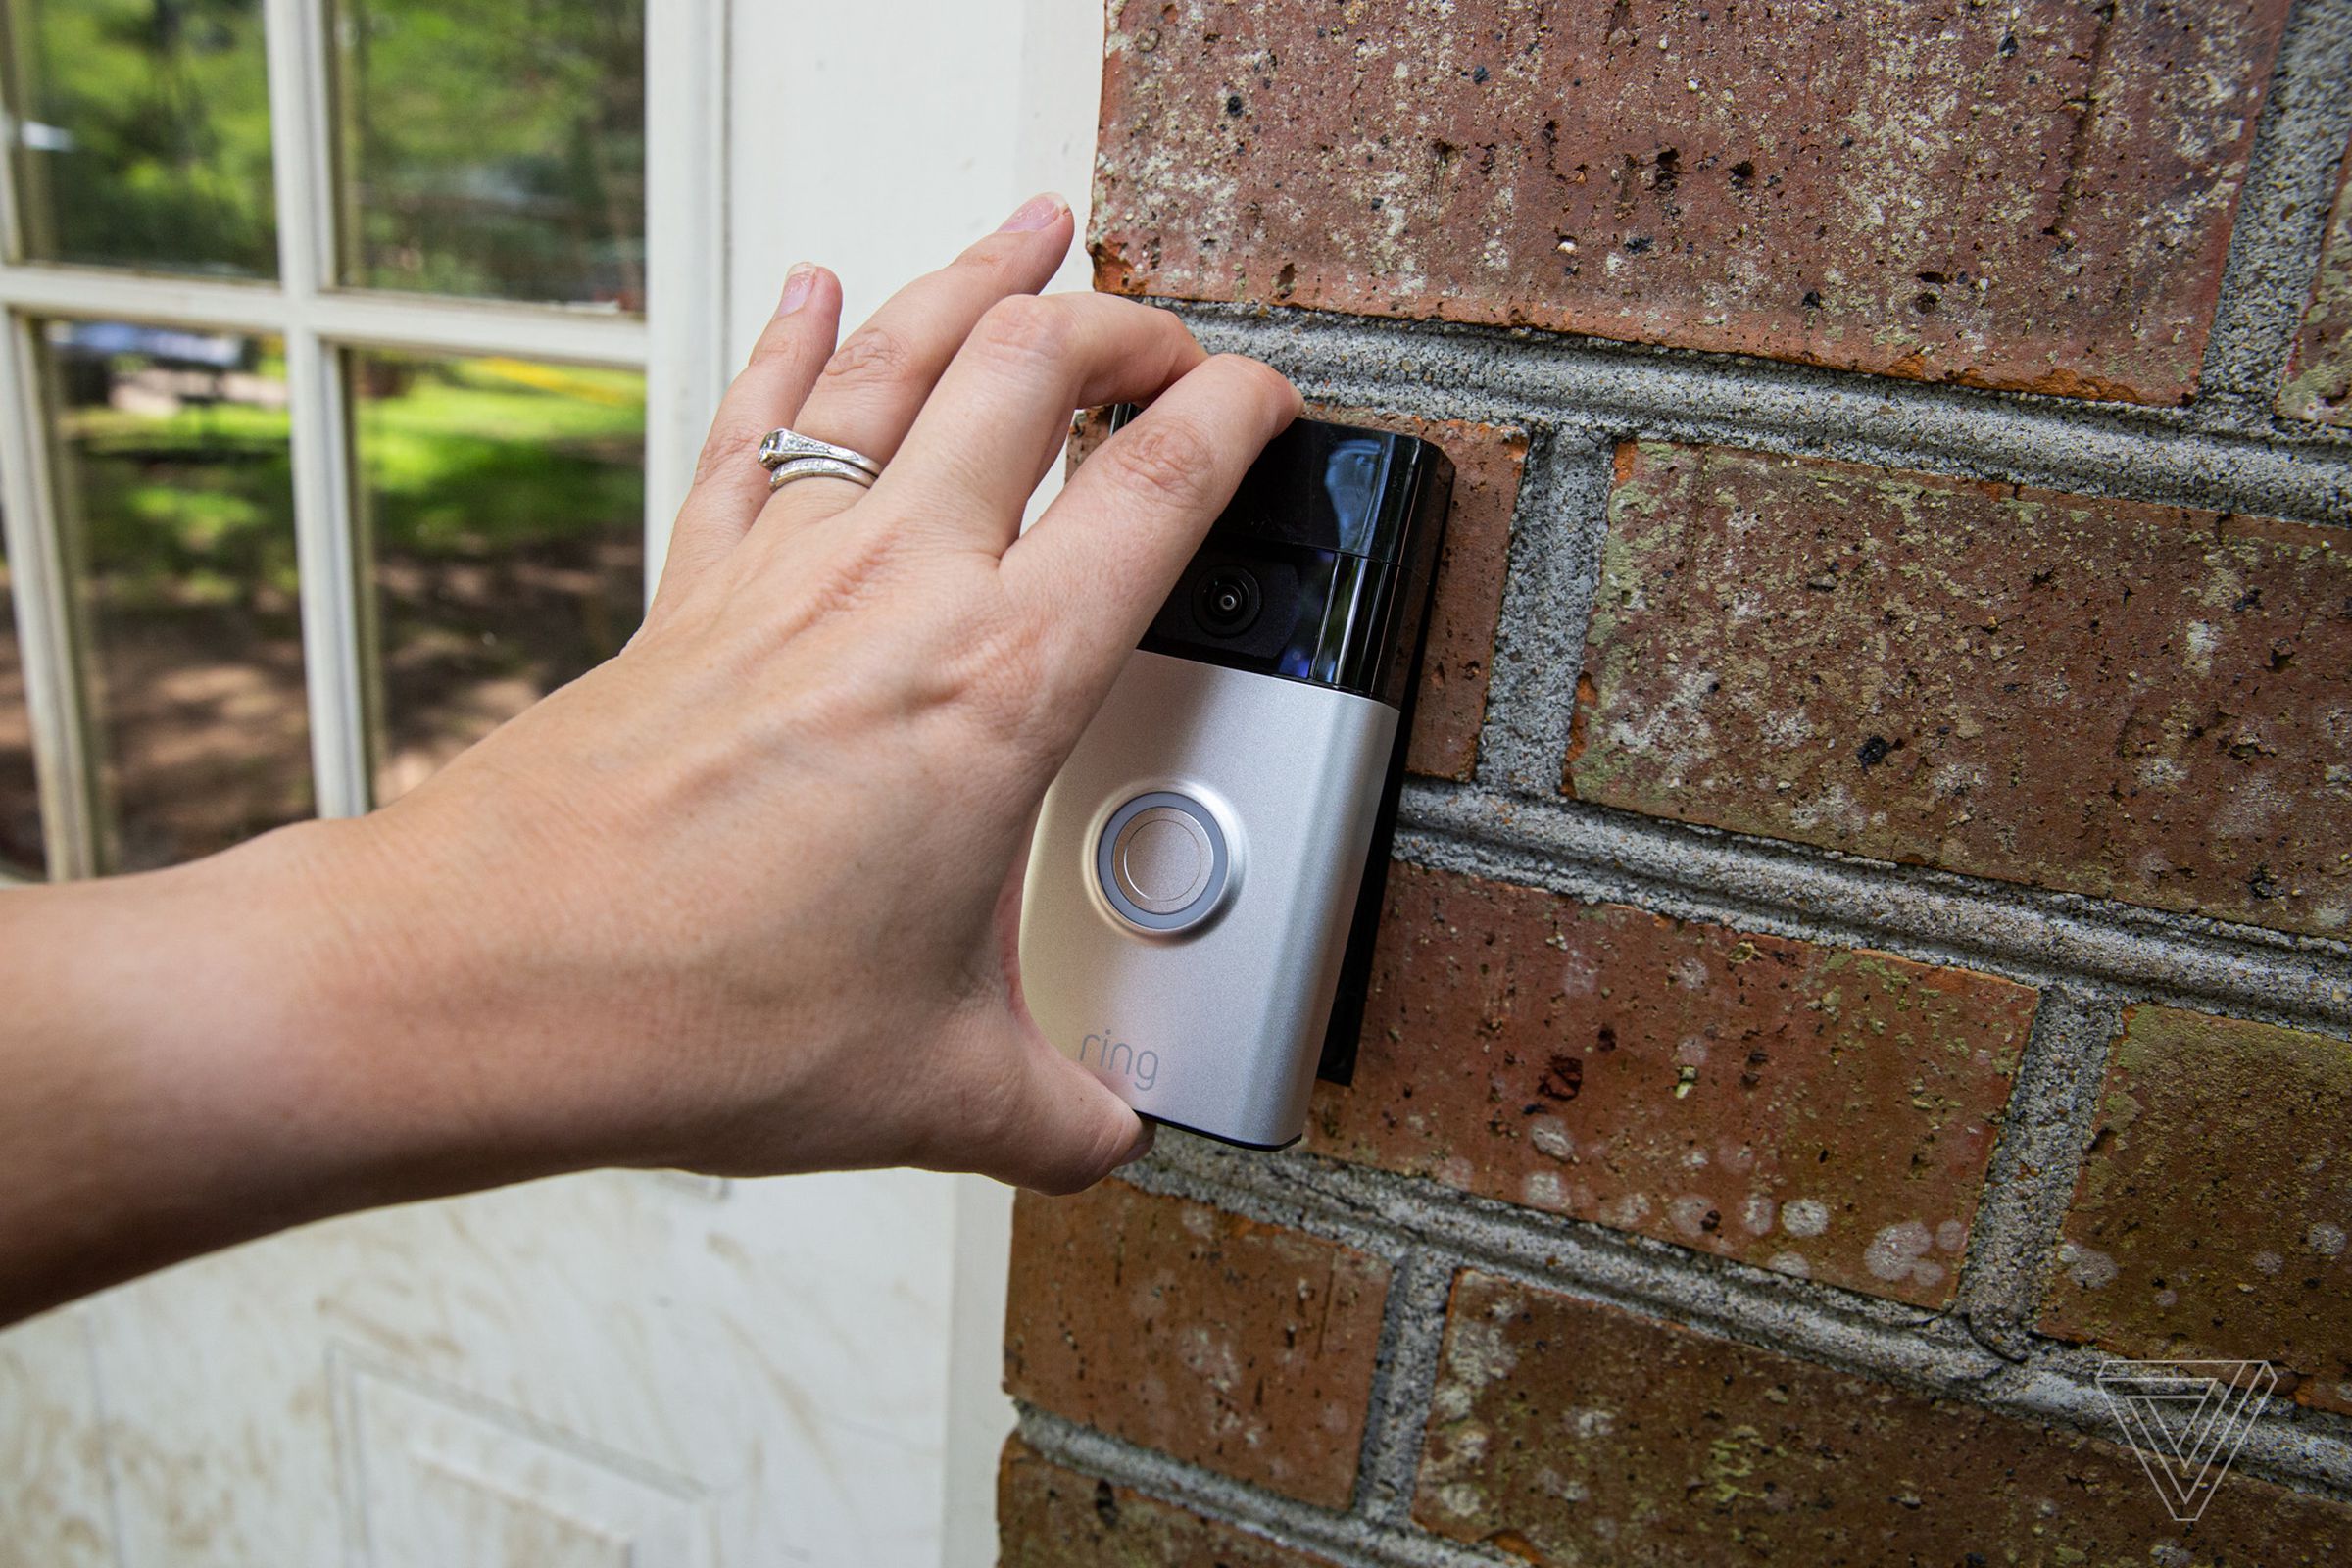 The Ring Video Doorbell 2020 attaches to a mounting bracket.